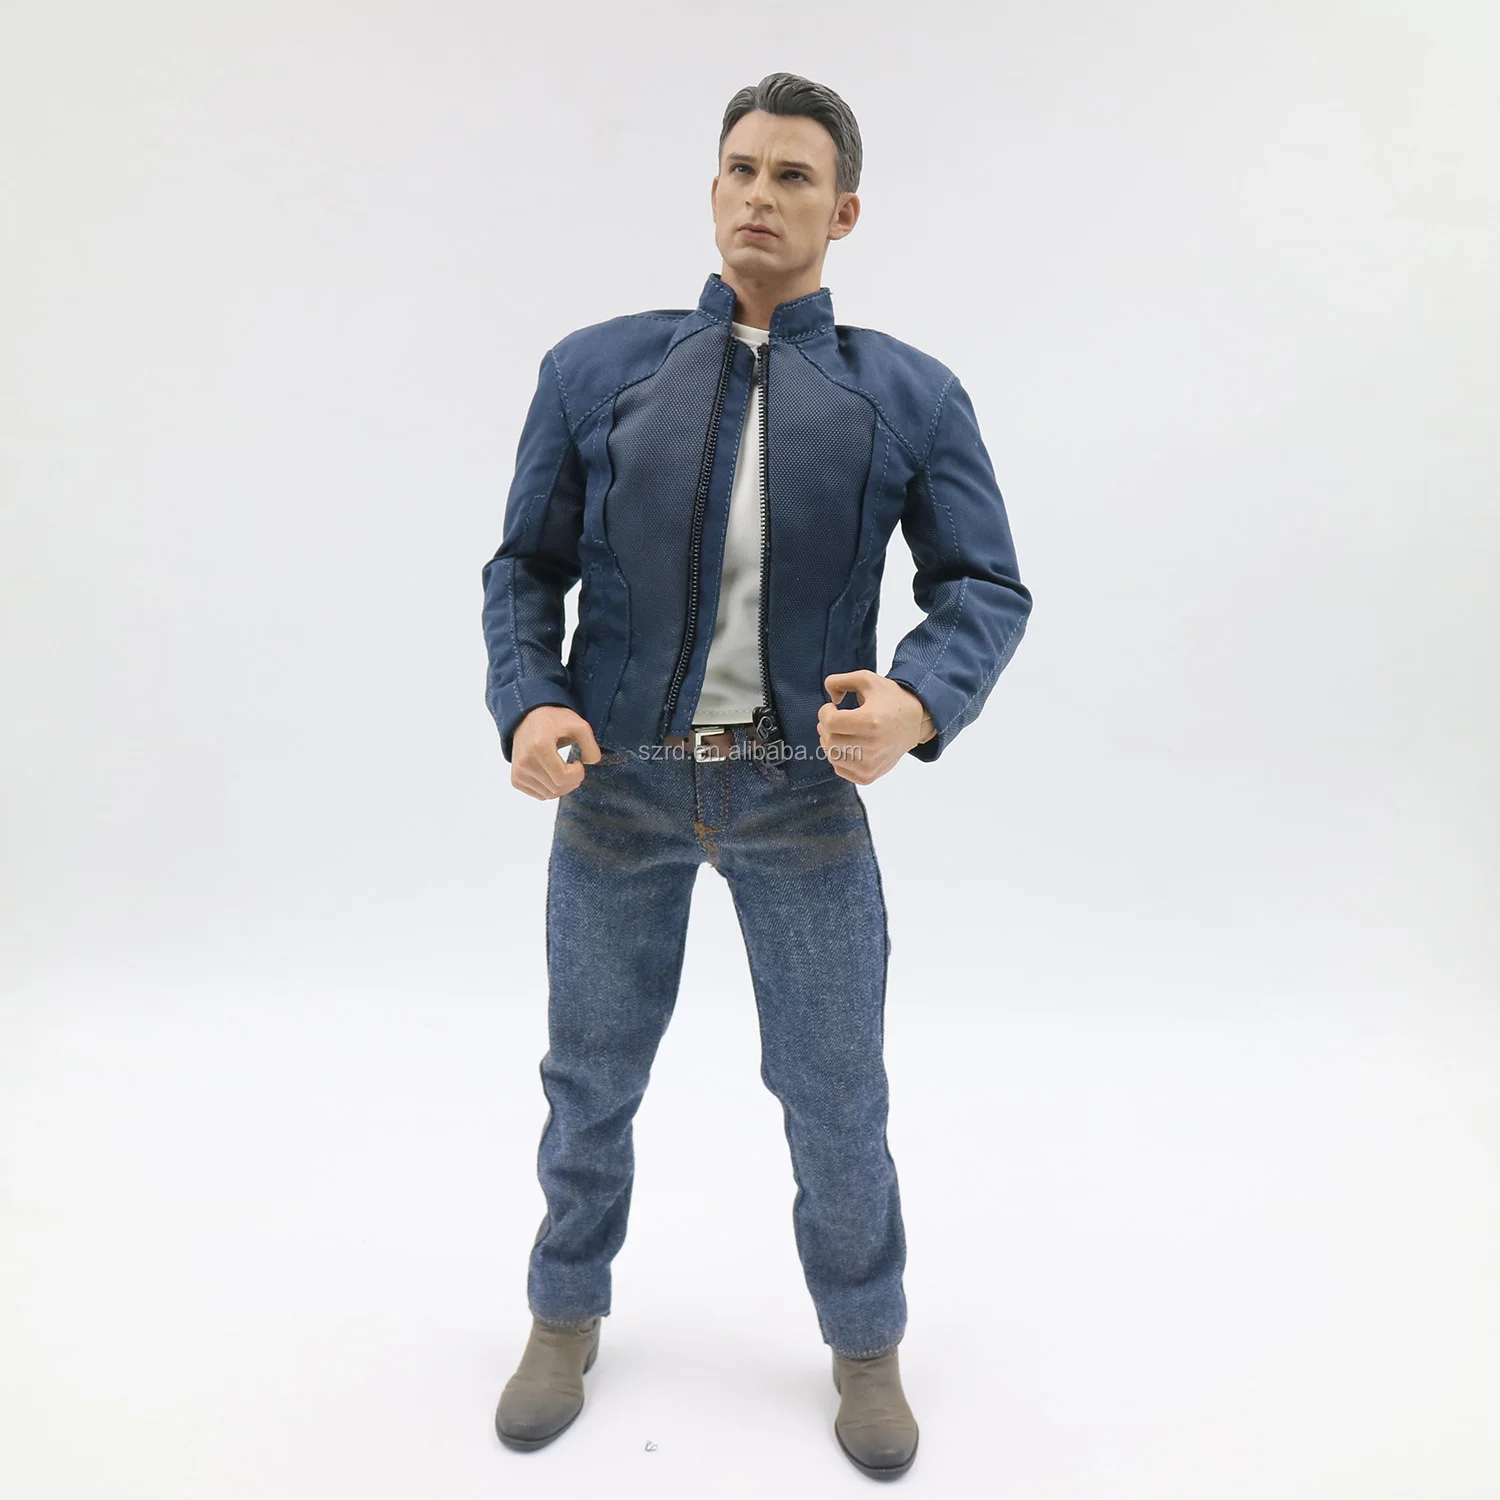 realistic action figure fabric clothes hot